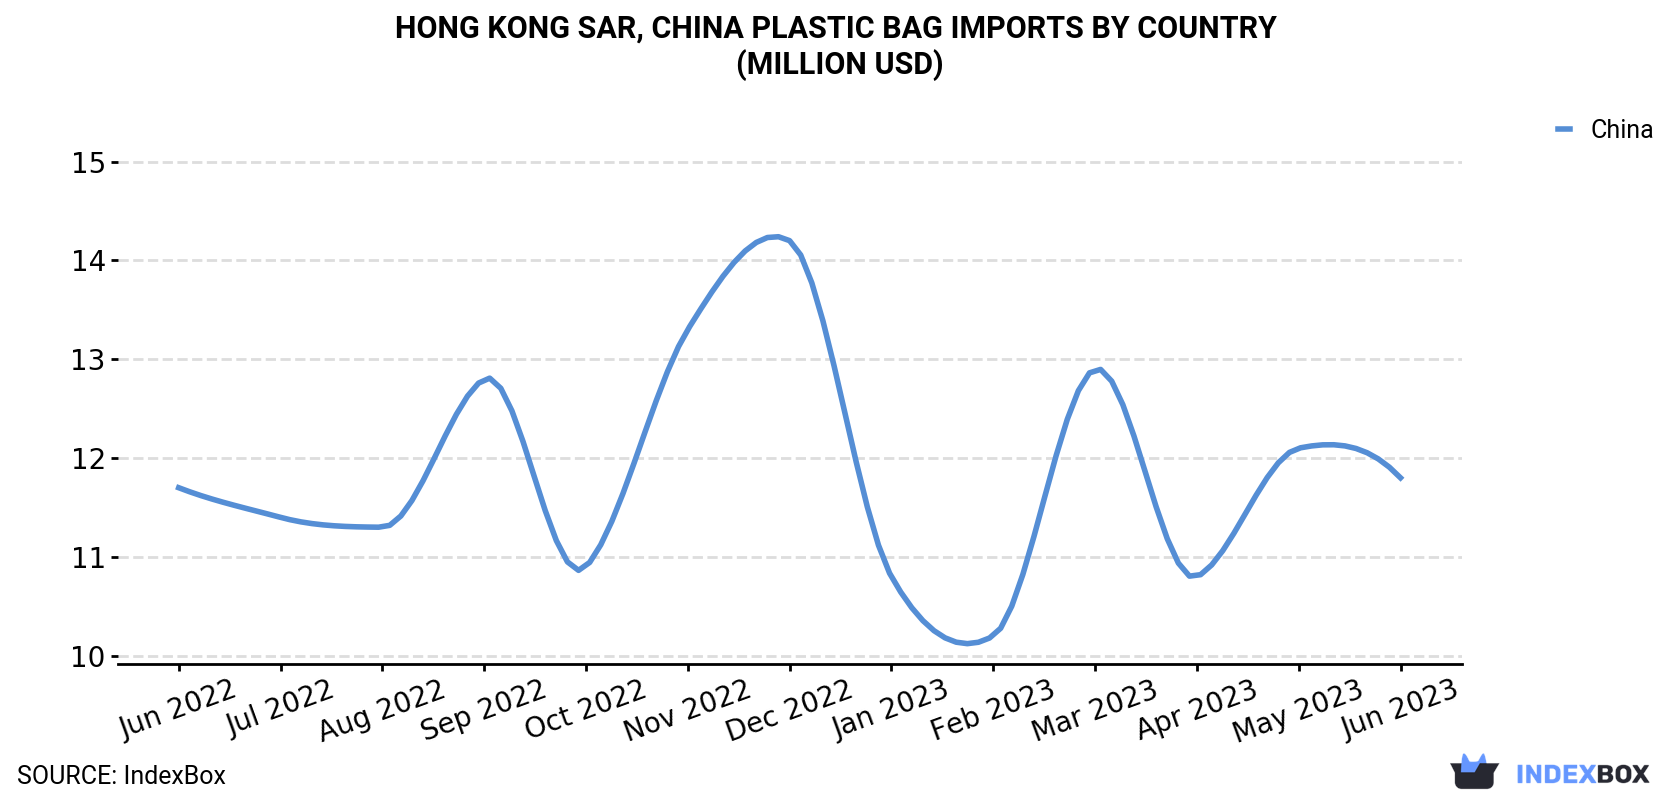 Hong Kong Plastic Bag Imports By Country (Million USD)